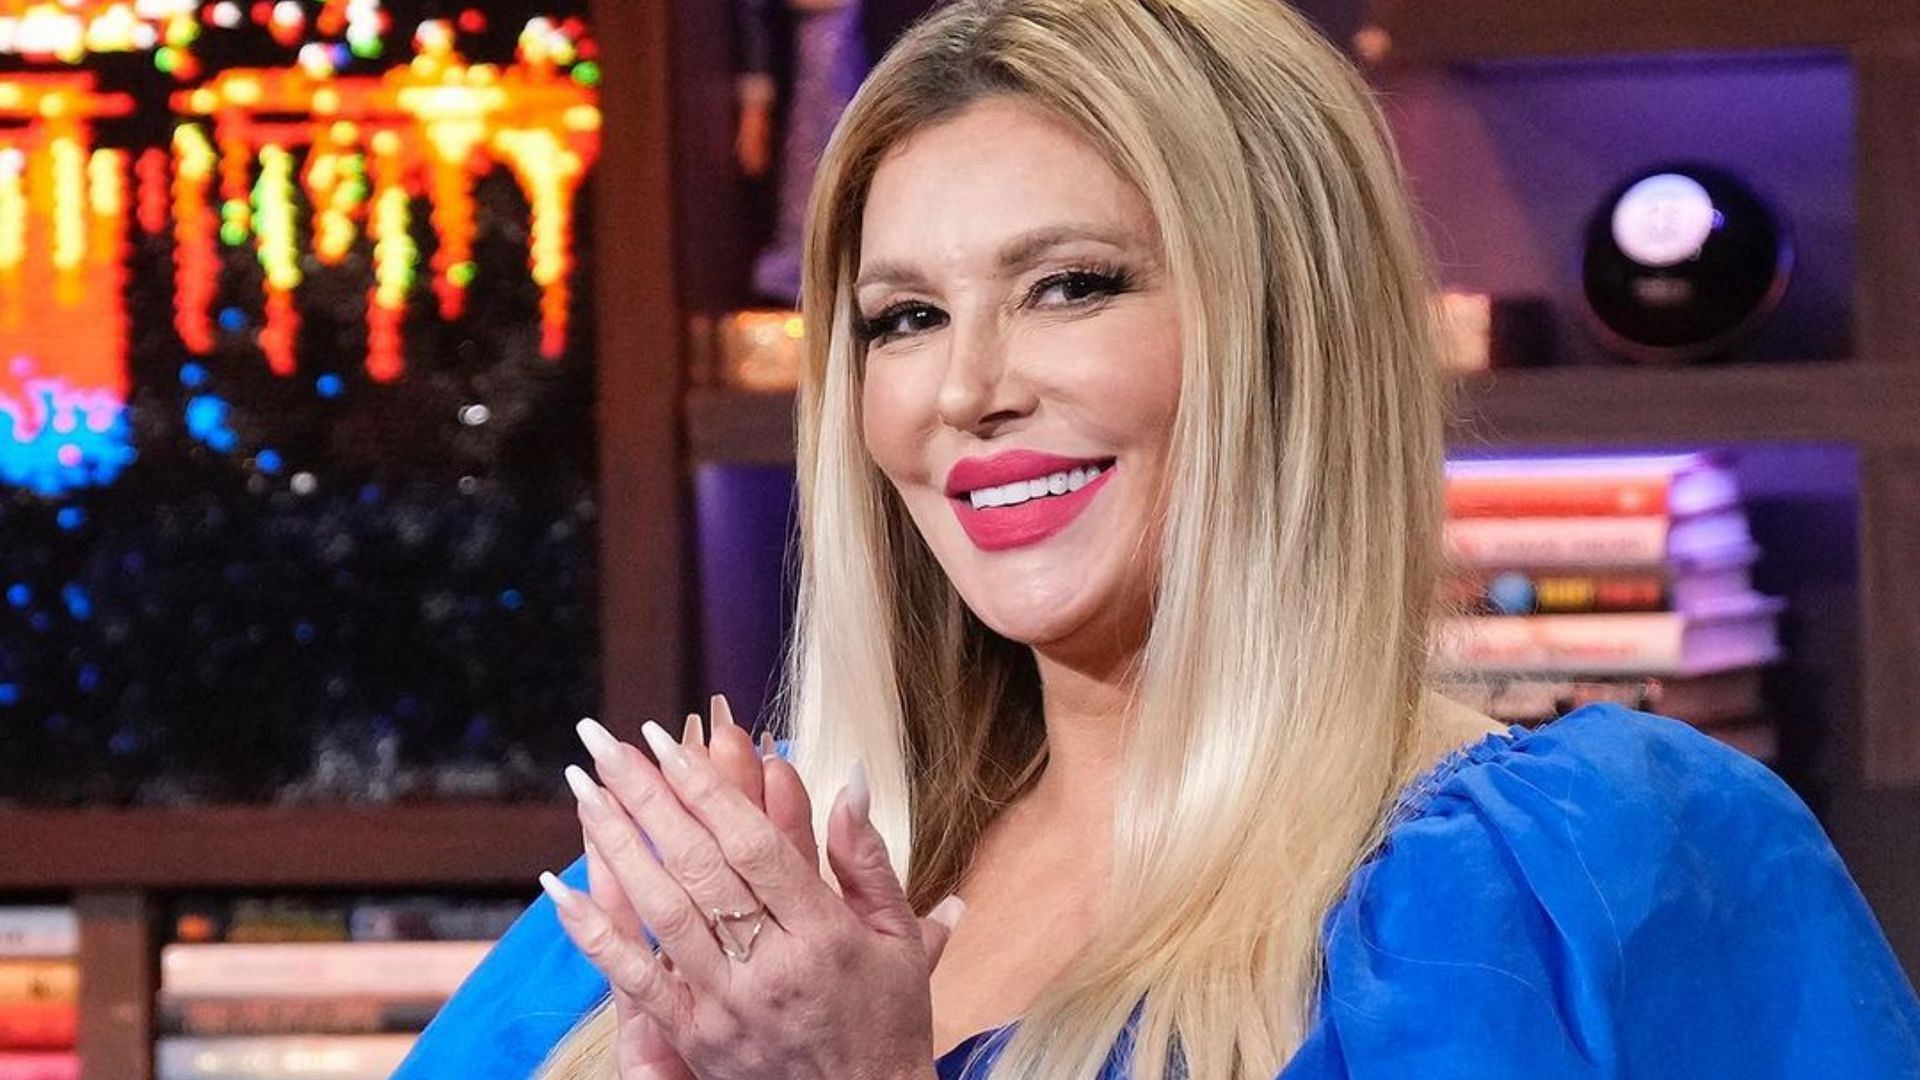 Brandi Glanville teases a possible return to RHOBH